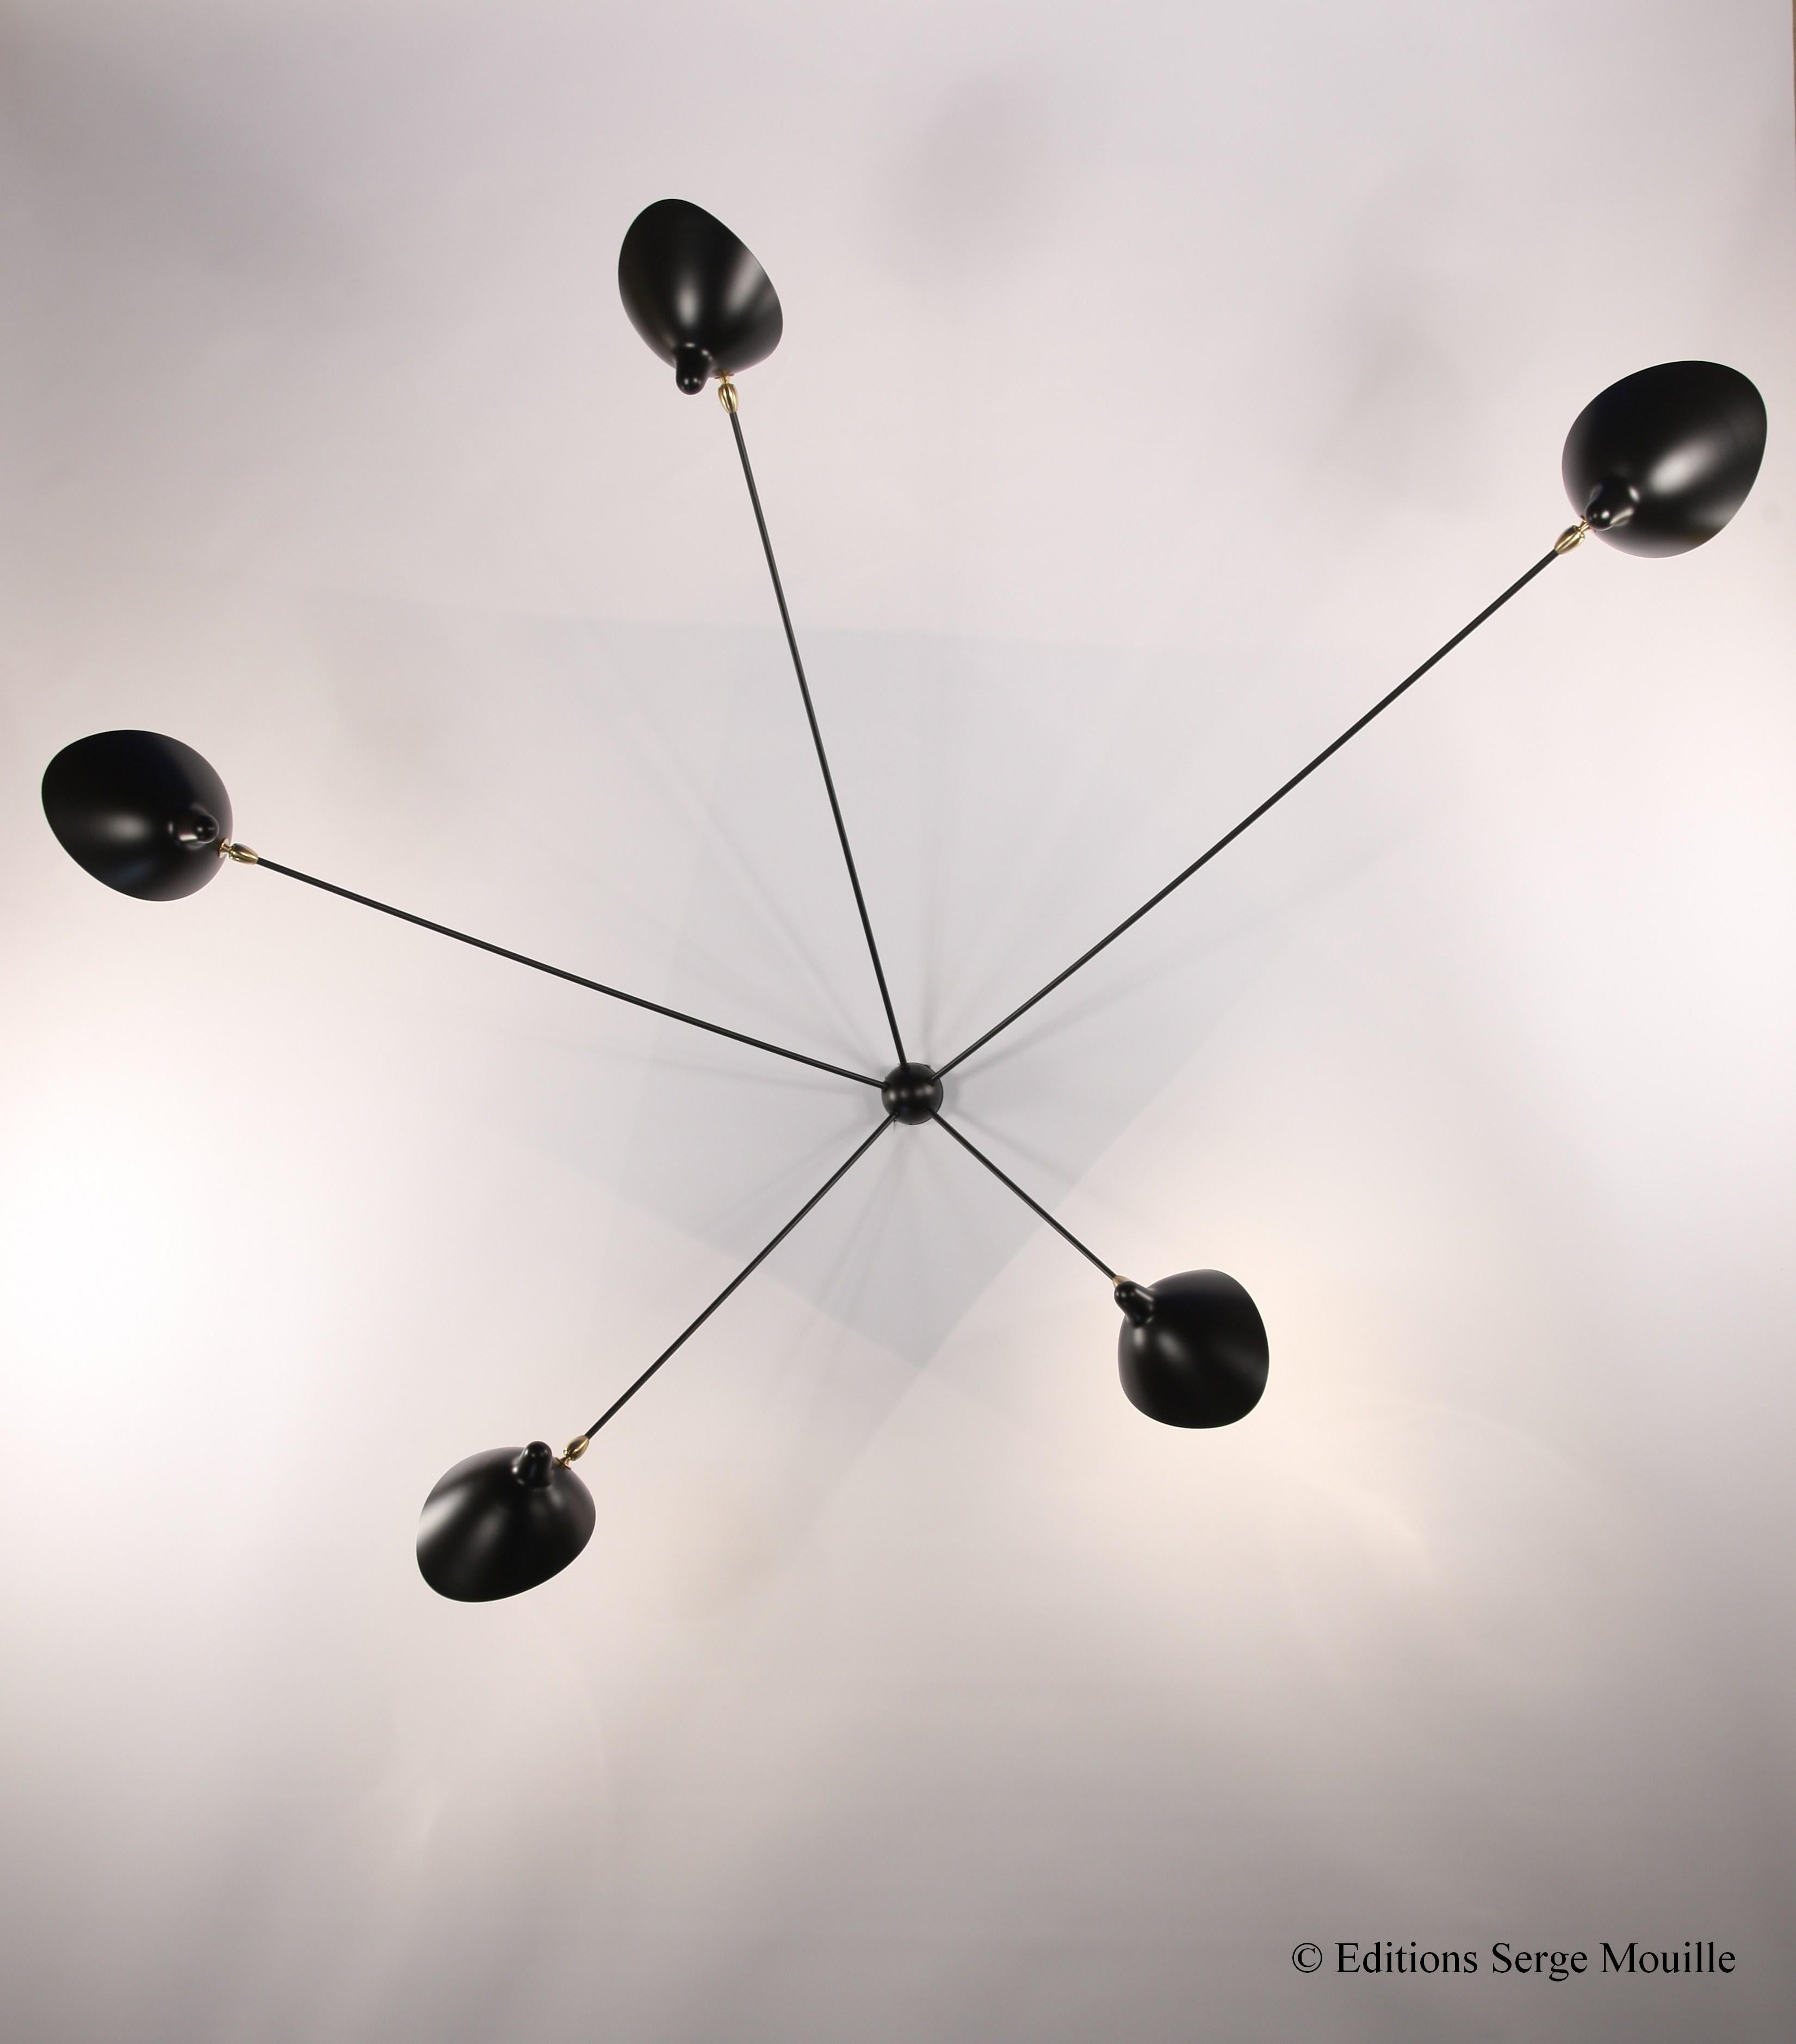 Serge Mouille 'Applique Araignée 5 Bras Fixes' wall light in black.

Originally designed in 1953, this monumental wall light is still made by Edition Serge Mouille in France using many of the same small-scale manufacturing techniques and